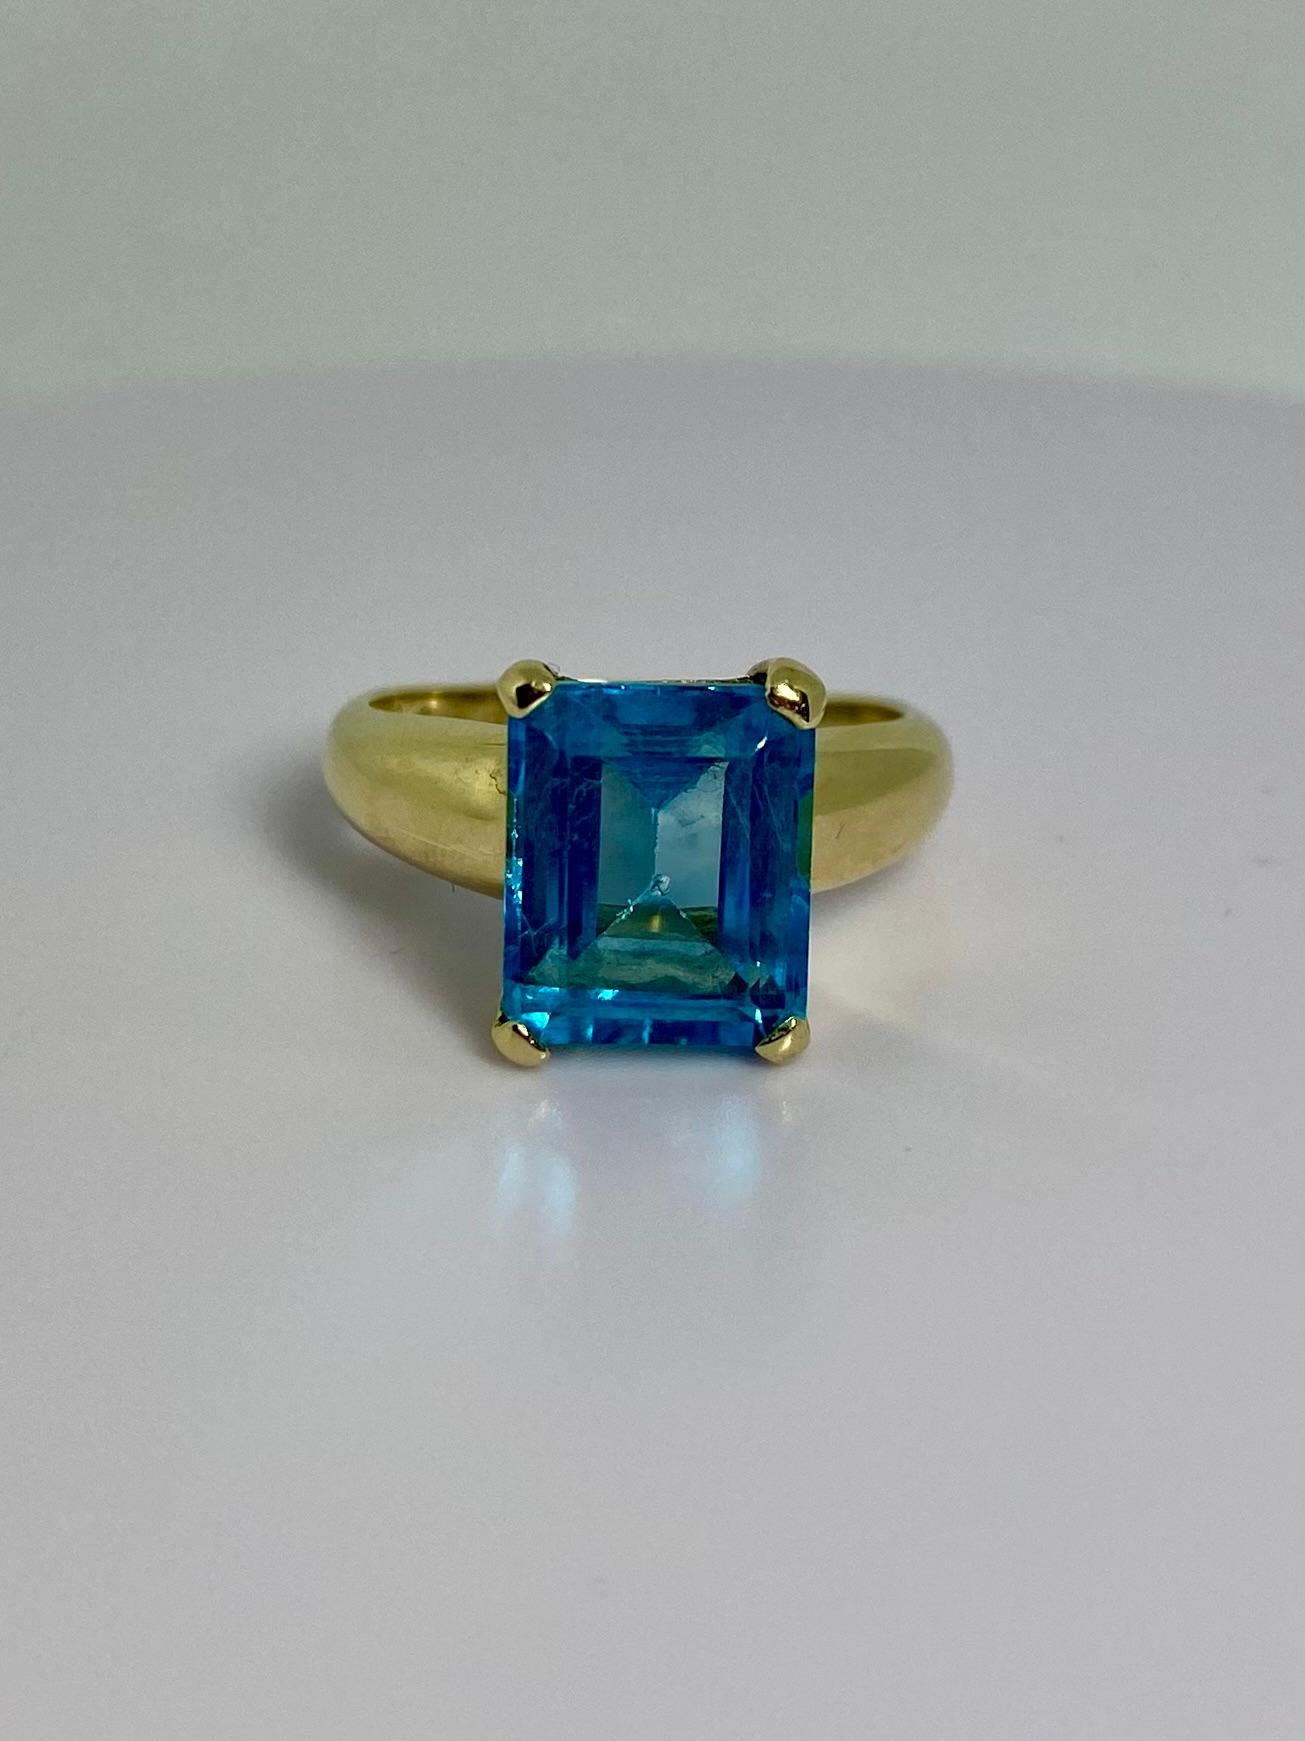 Beautiful vintage yellow gold ring. This ring is made of 14 carat yellow gold ring and is set with a rectangular facetted topas of about 6.17 carat. The topas is set in a yellow gold chaton setting. Look at the pictures to see this beautiful and